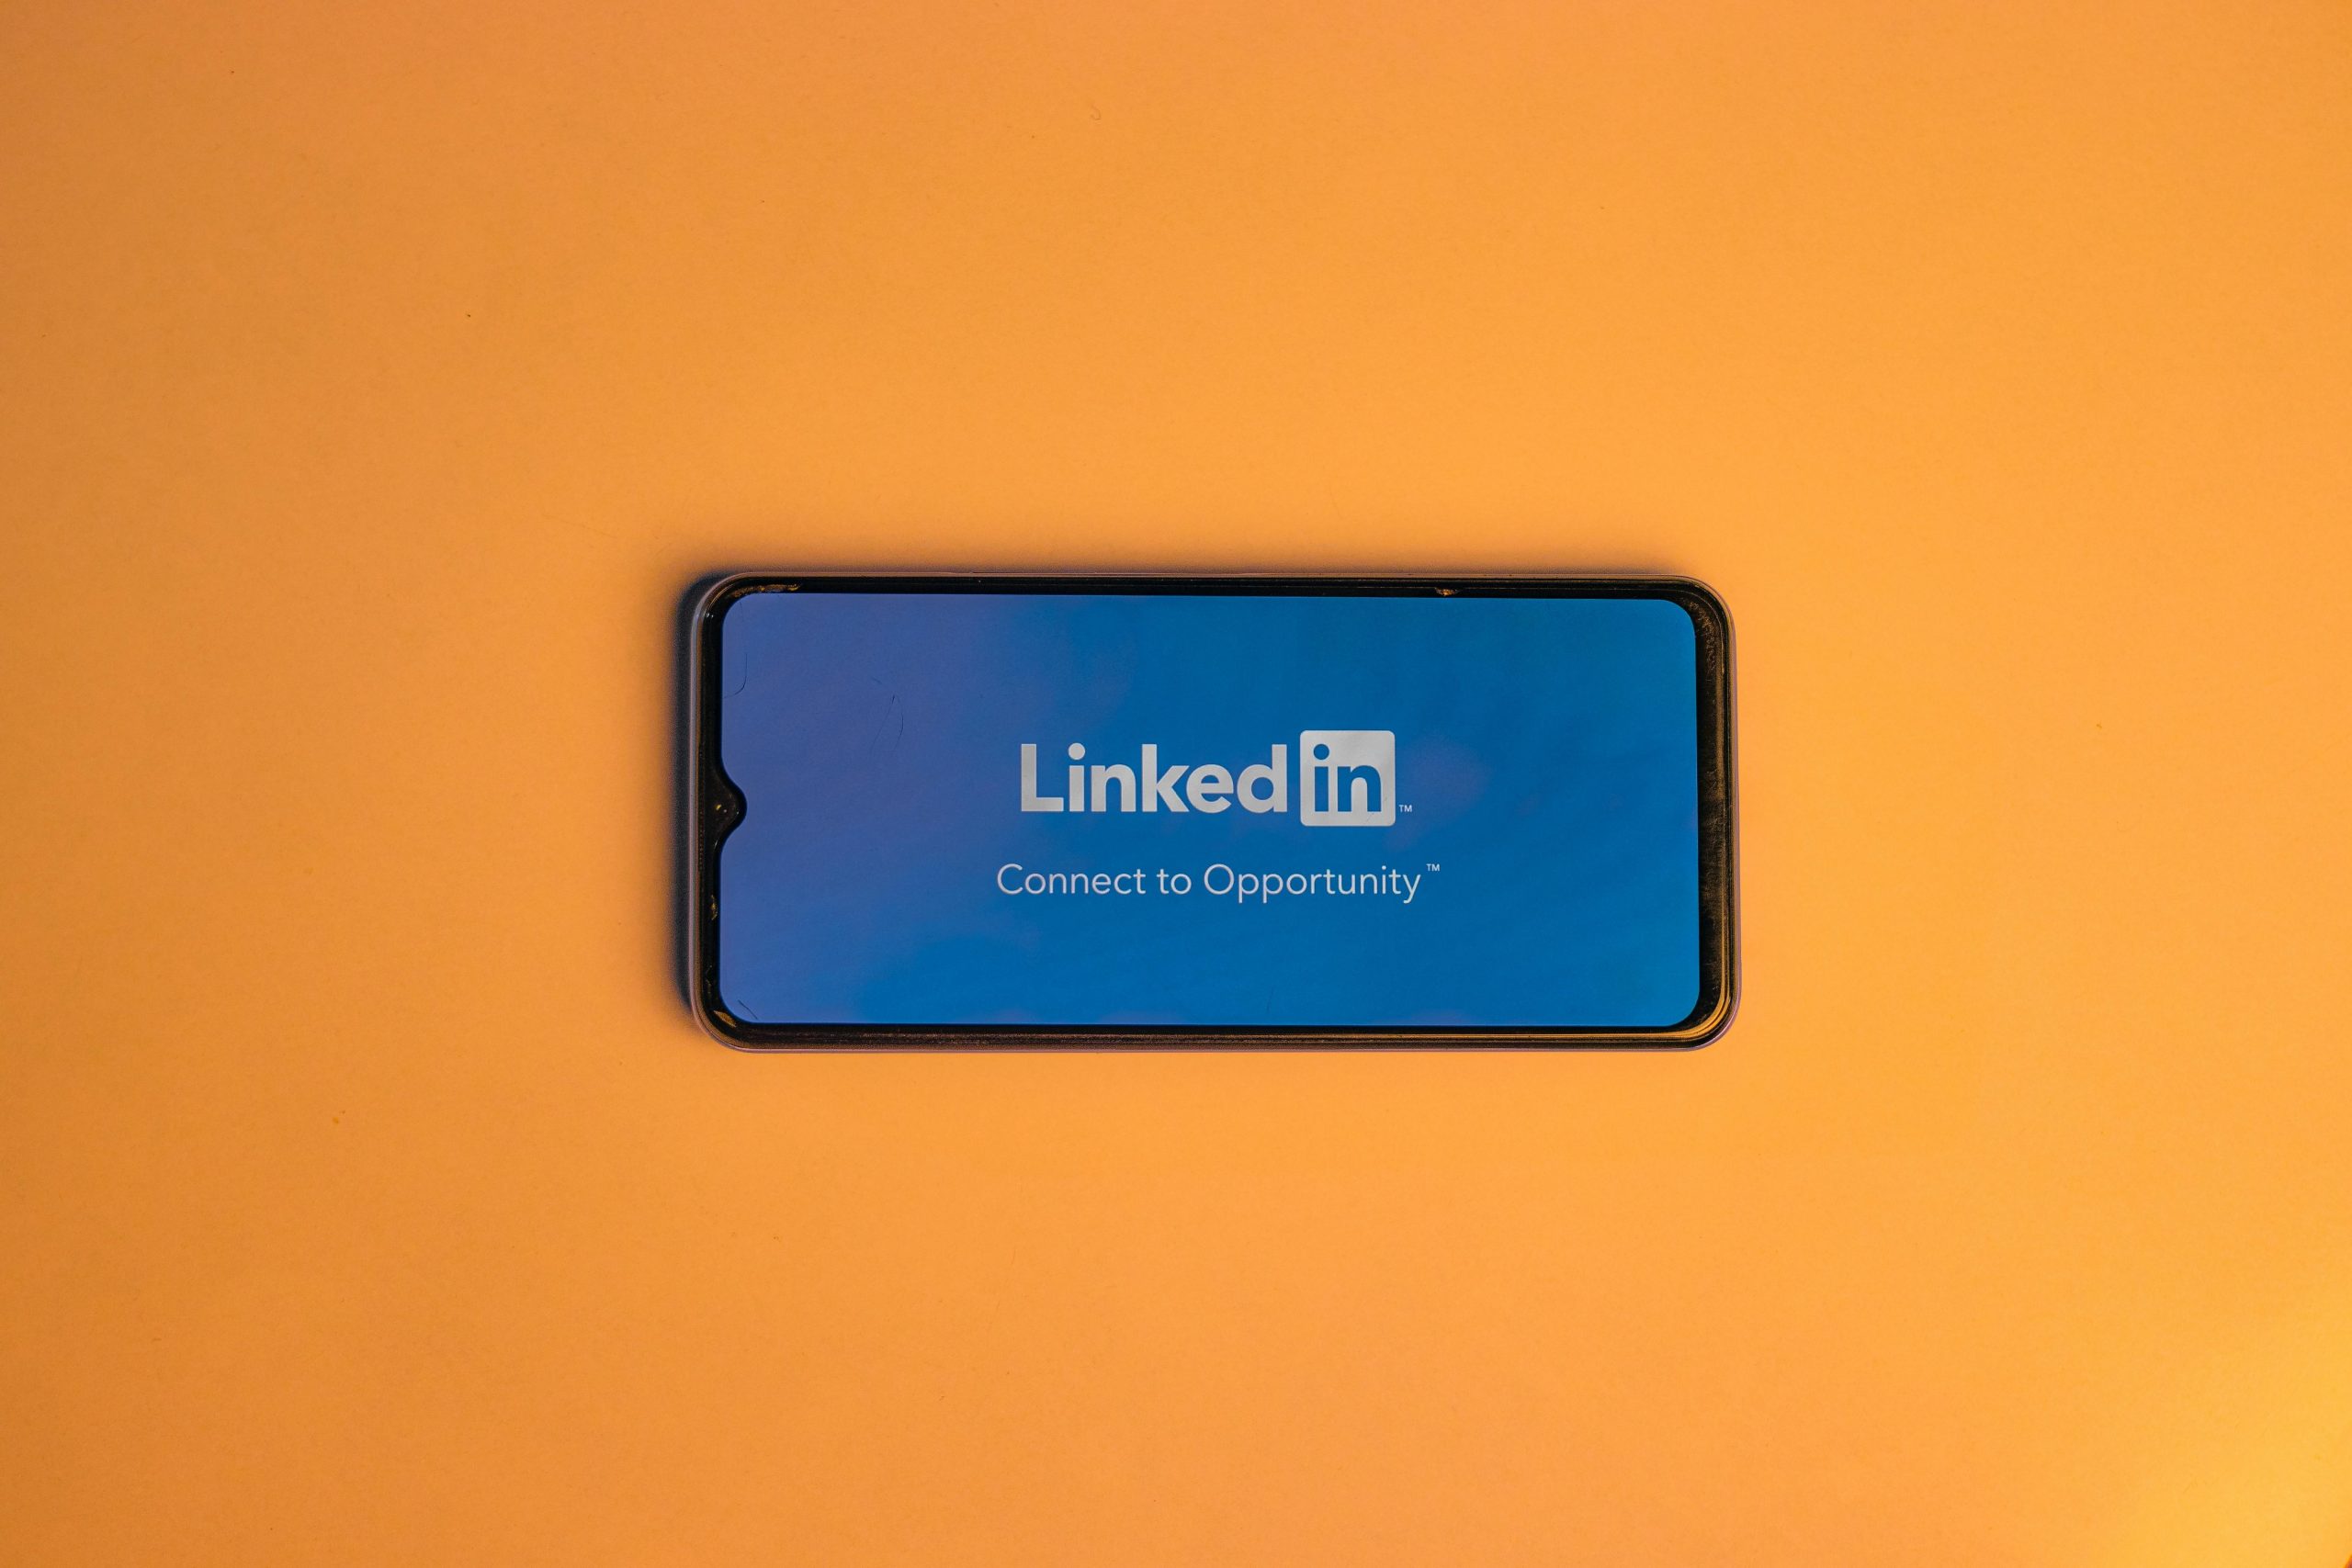 Spruce up your LinkedIn: 8 Easy Ways to Up Your Job Search Game